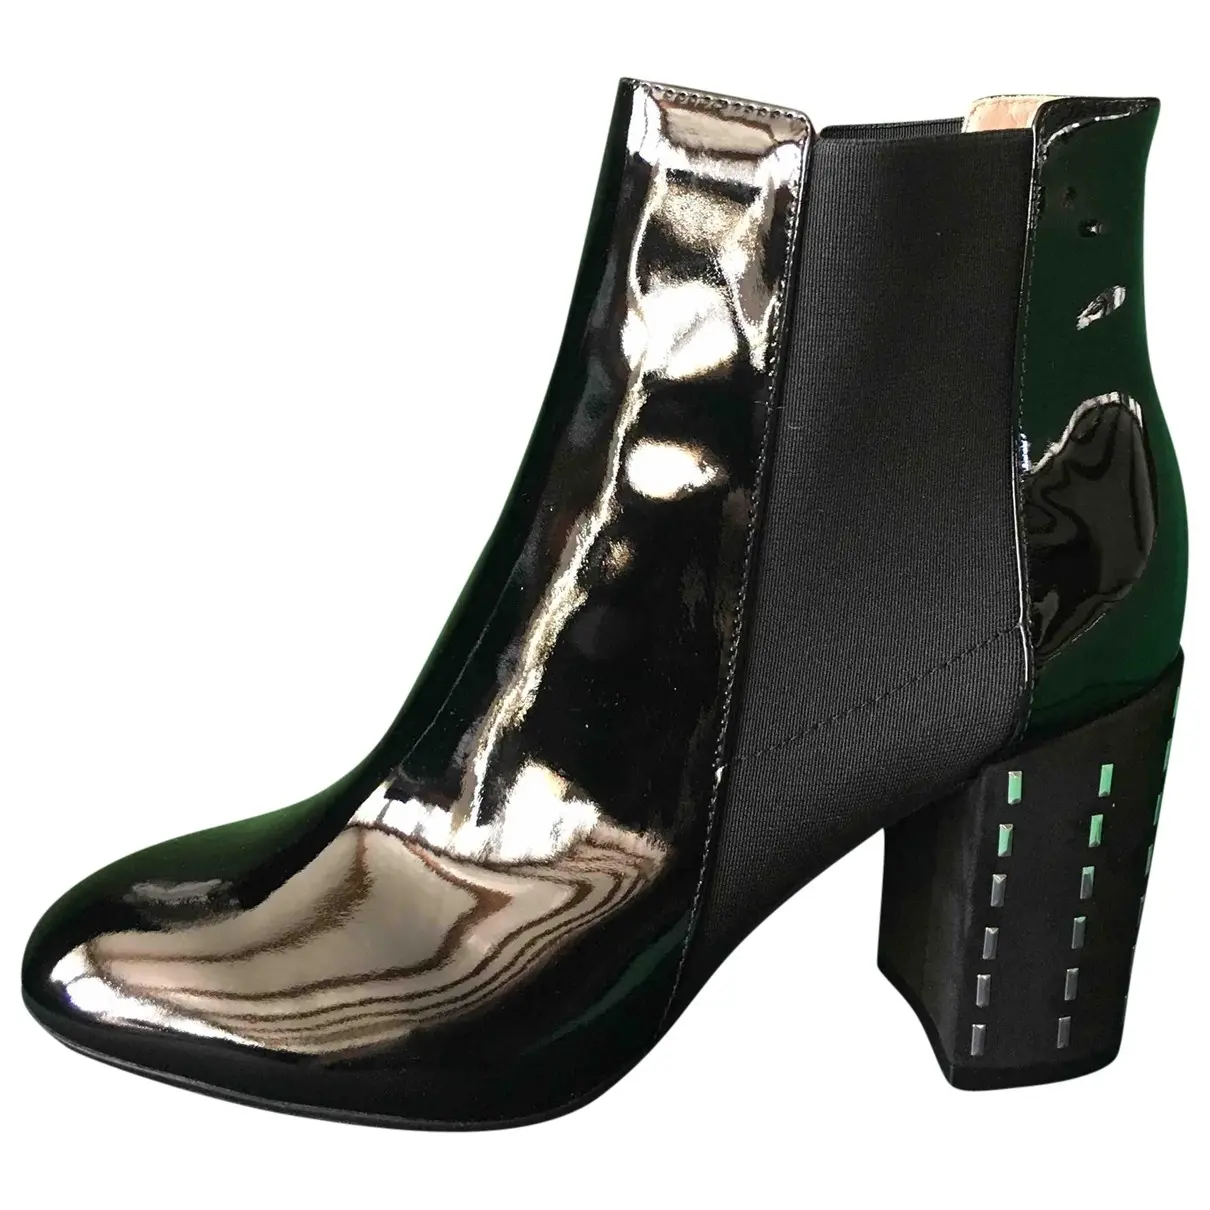 Patent leather boots Pollini